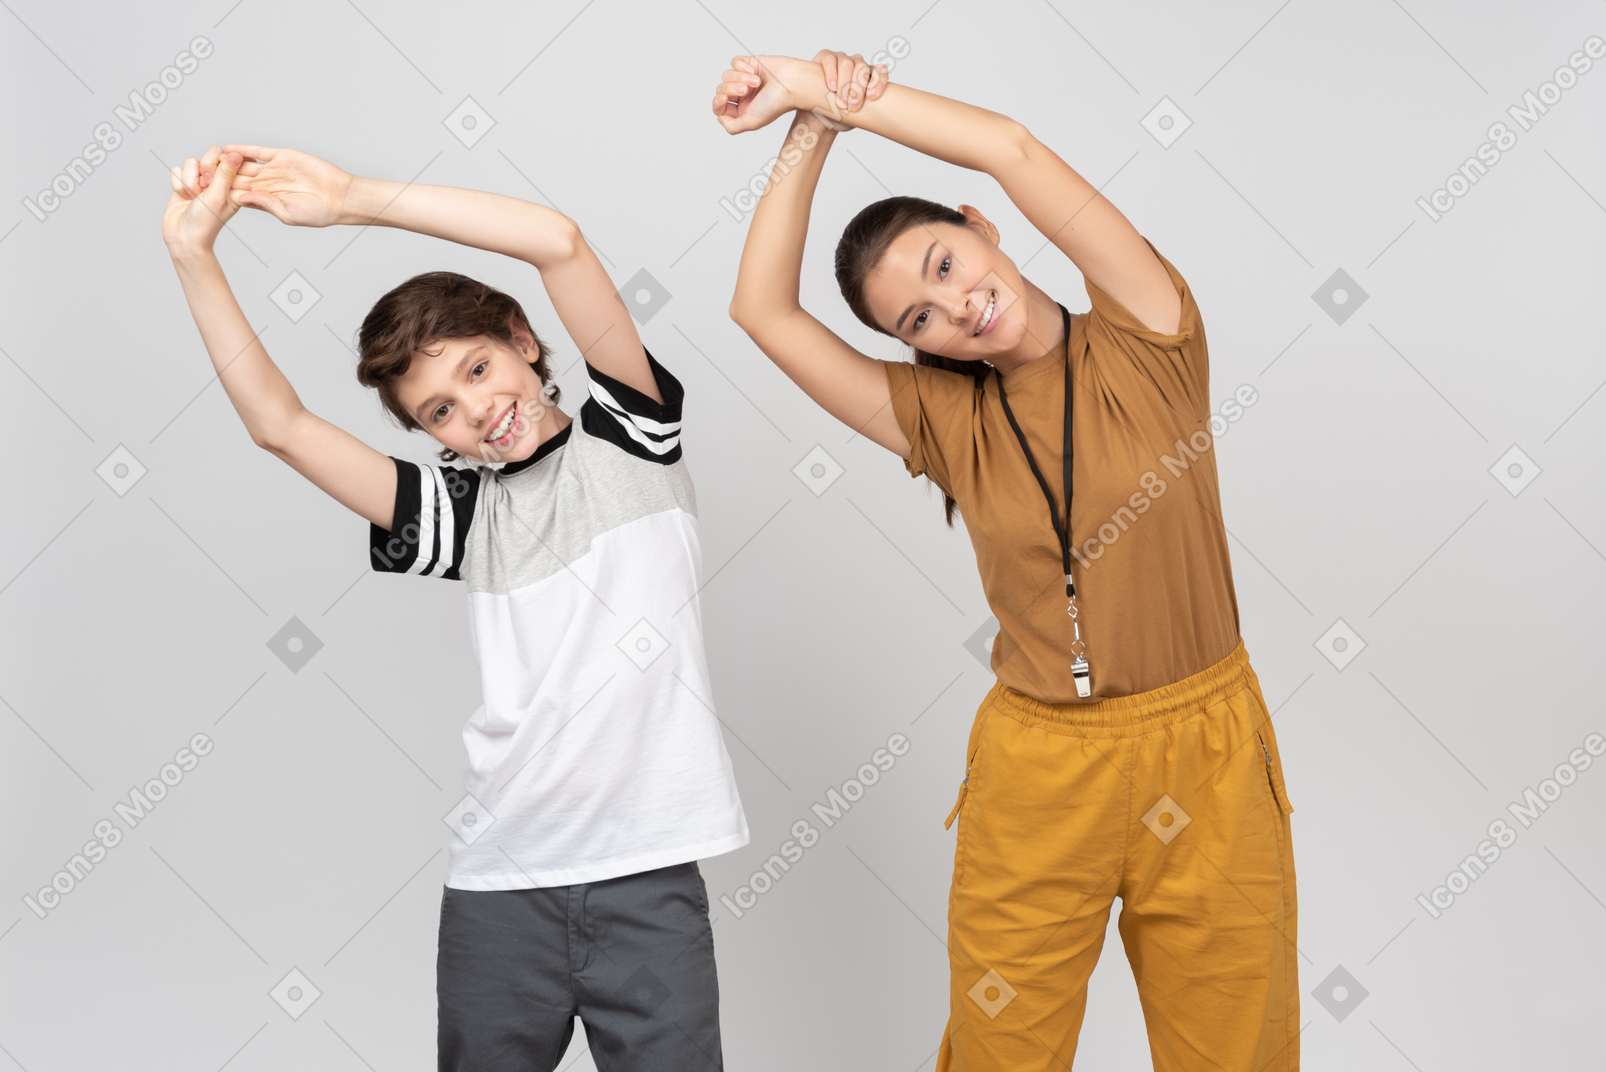 Physical education teacher and pupil exercising